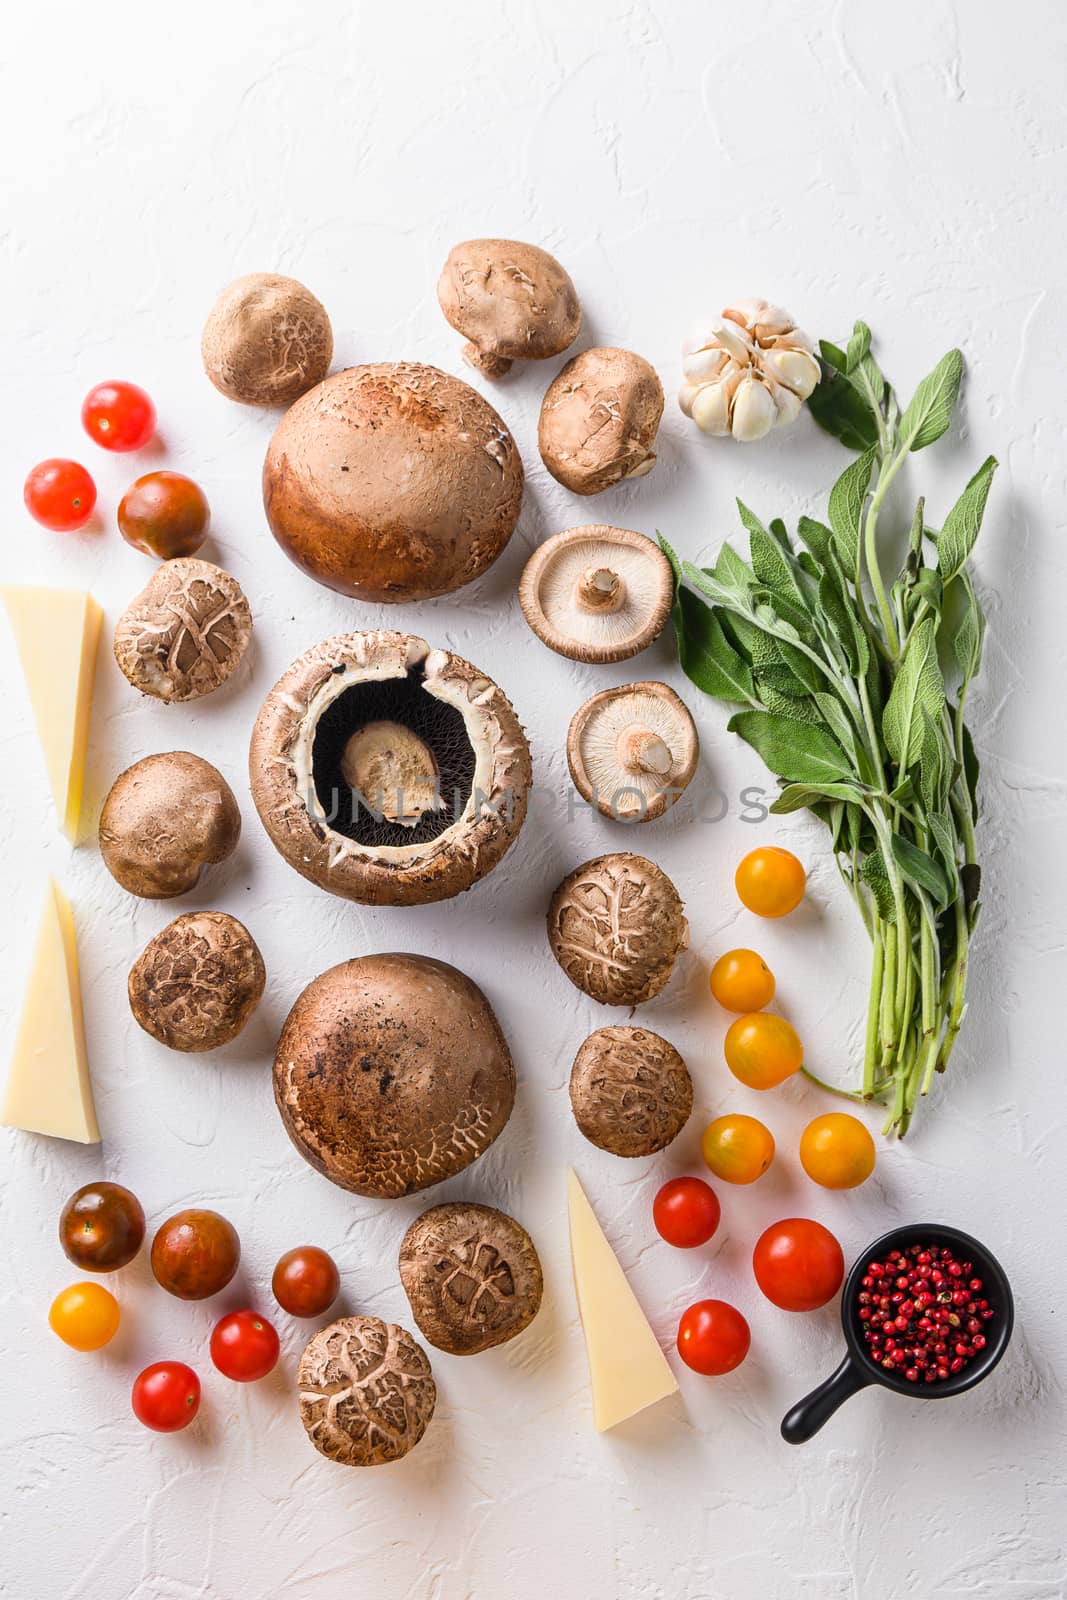 Portabello mushrooms ingredients for baking, cheddar cheese, cherry tomatoes and sage on white background, top view